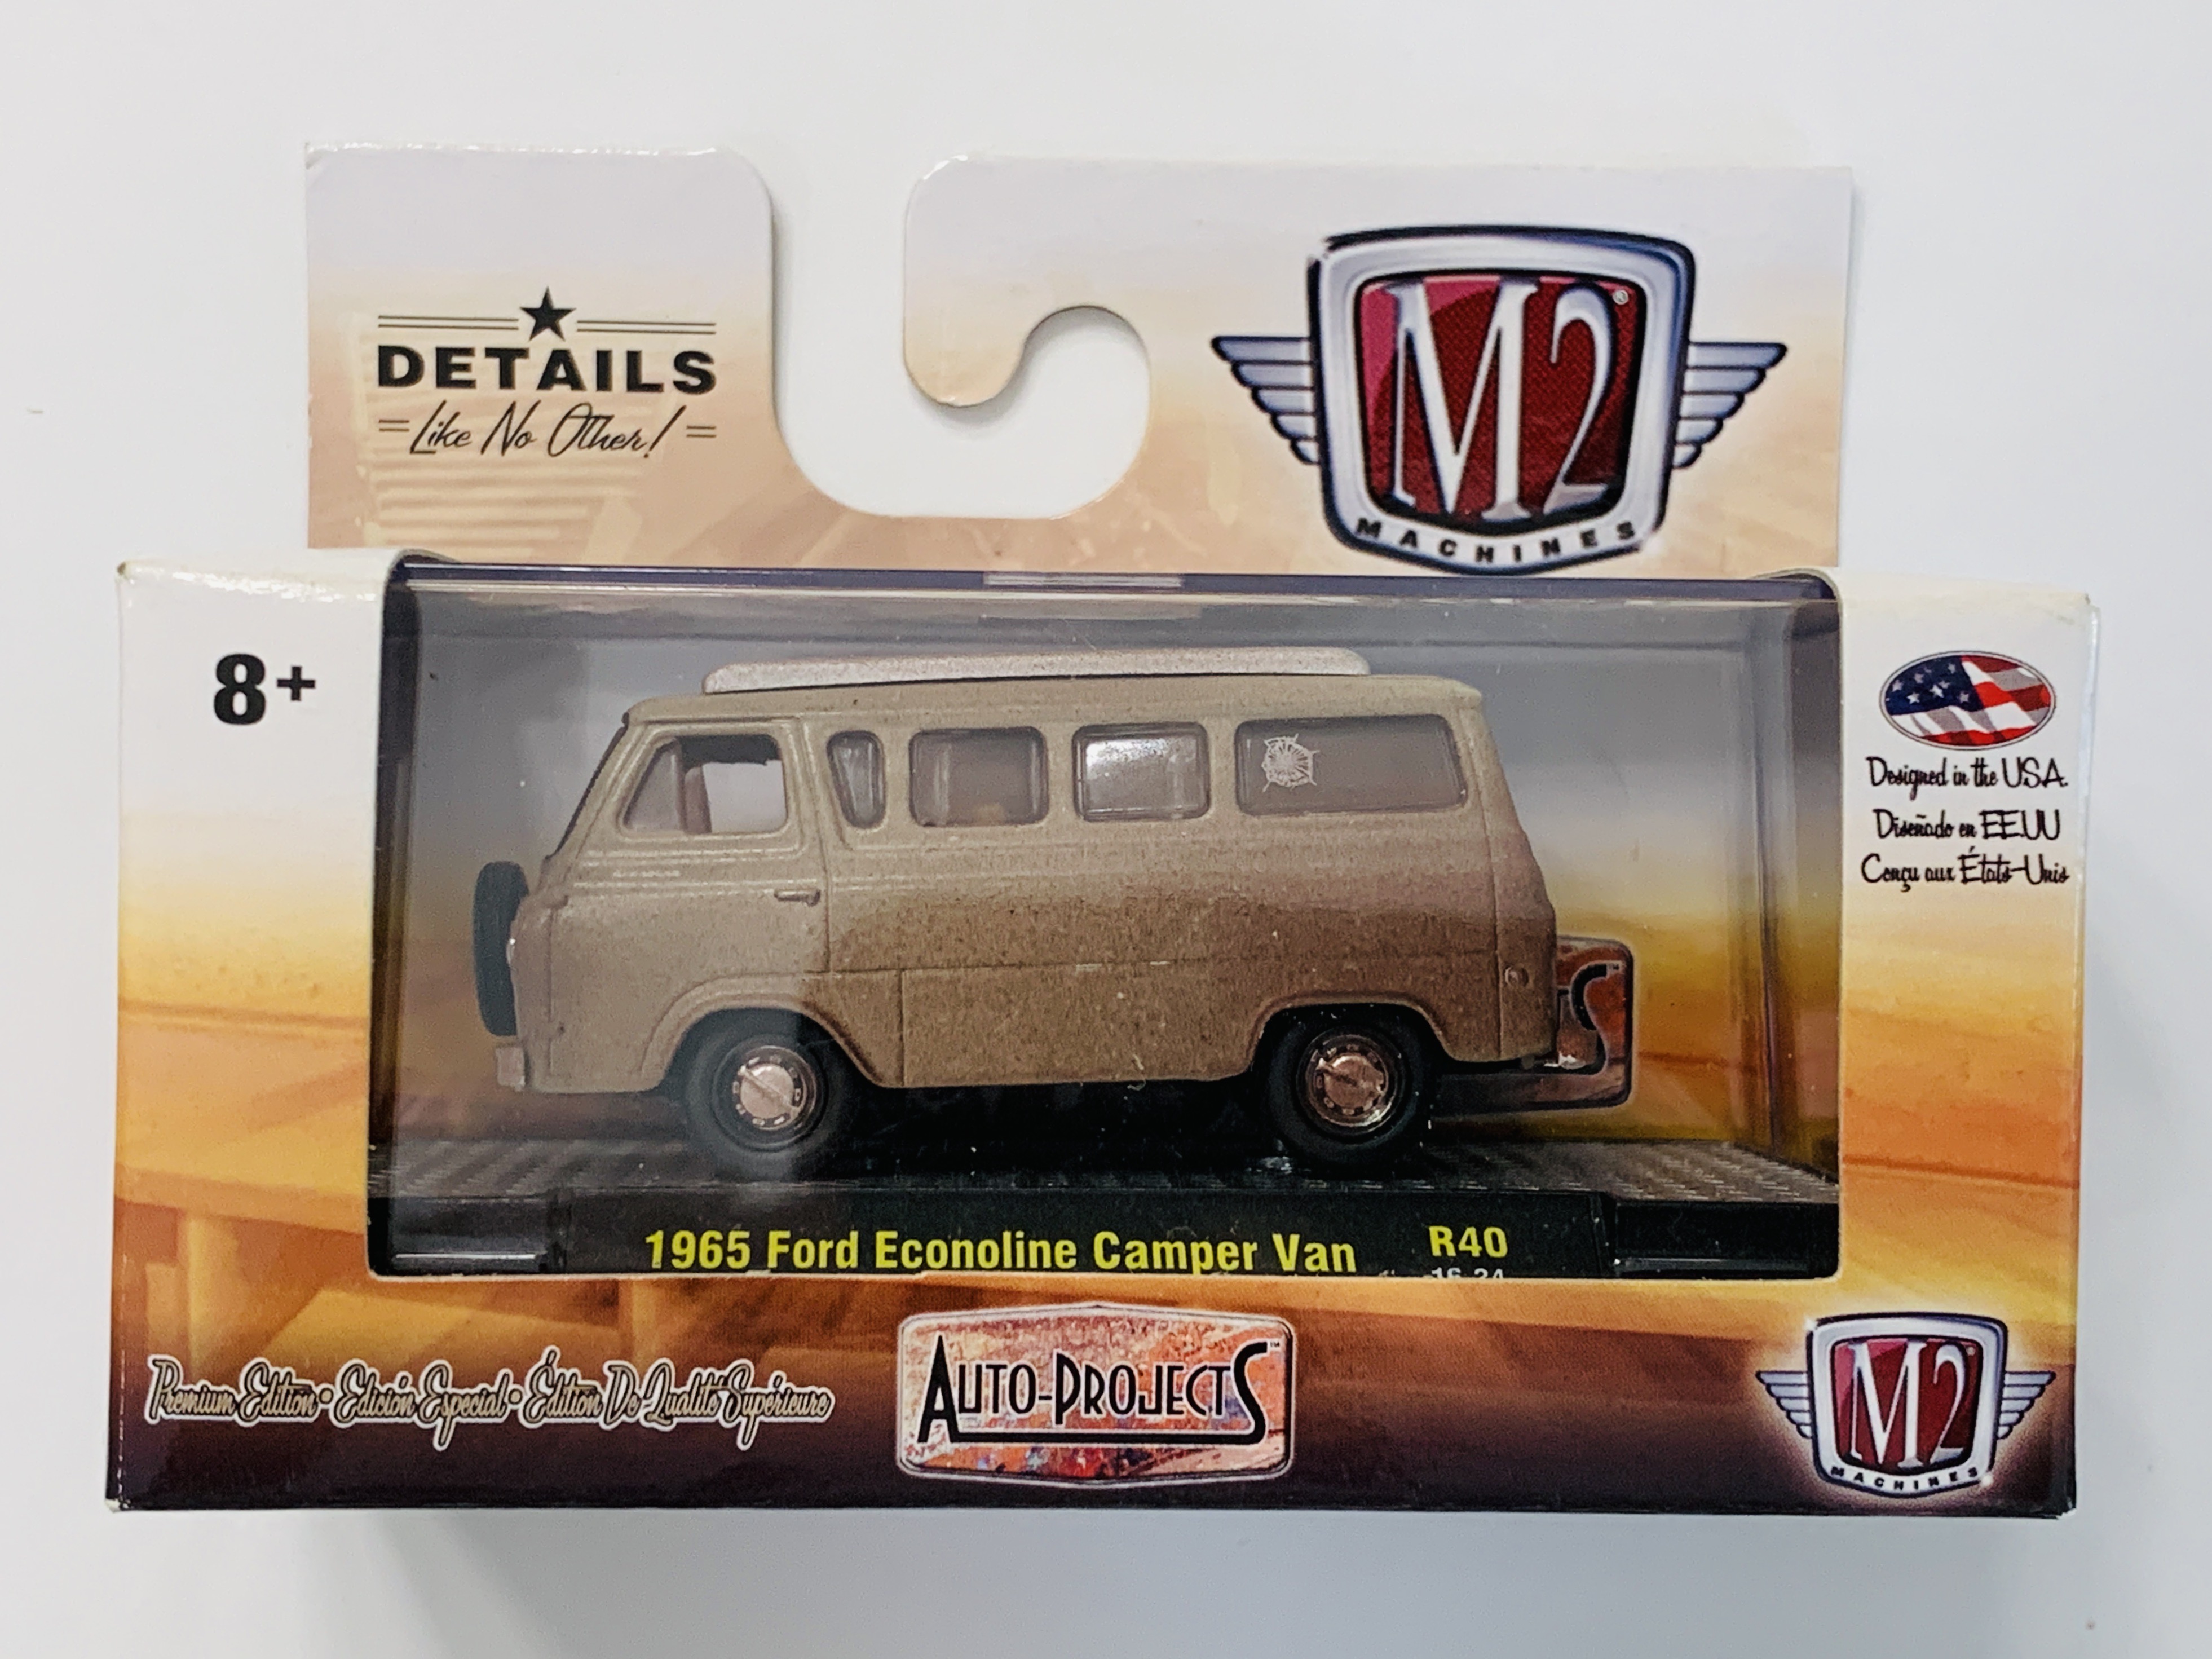 M2 Machines Auto-Projects 1965 Ford Econoline Camper Van R40 - 3,888 Made